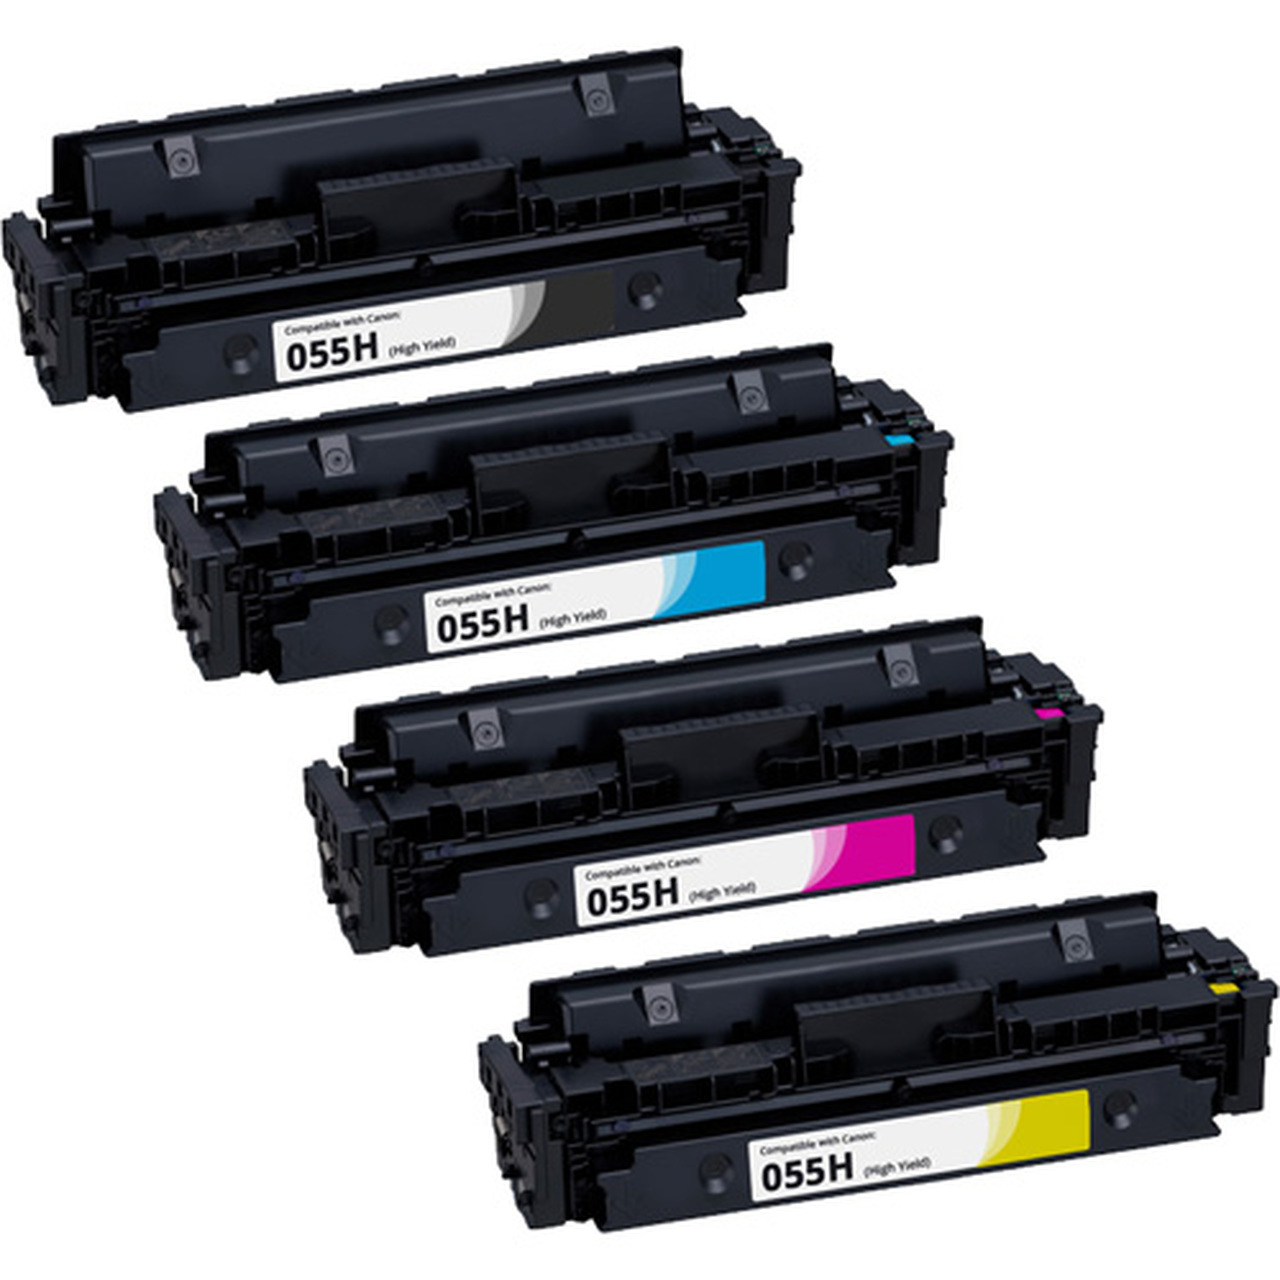 Canon 055H WITH CHIP High Yield 4 Pack Combo Toner Cartridge for MF741 MF743 MF745 MF746 & mor